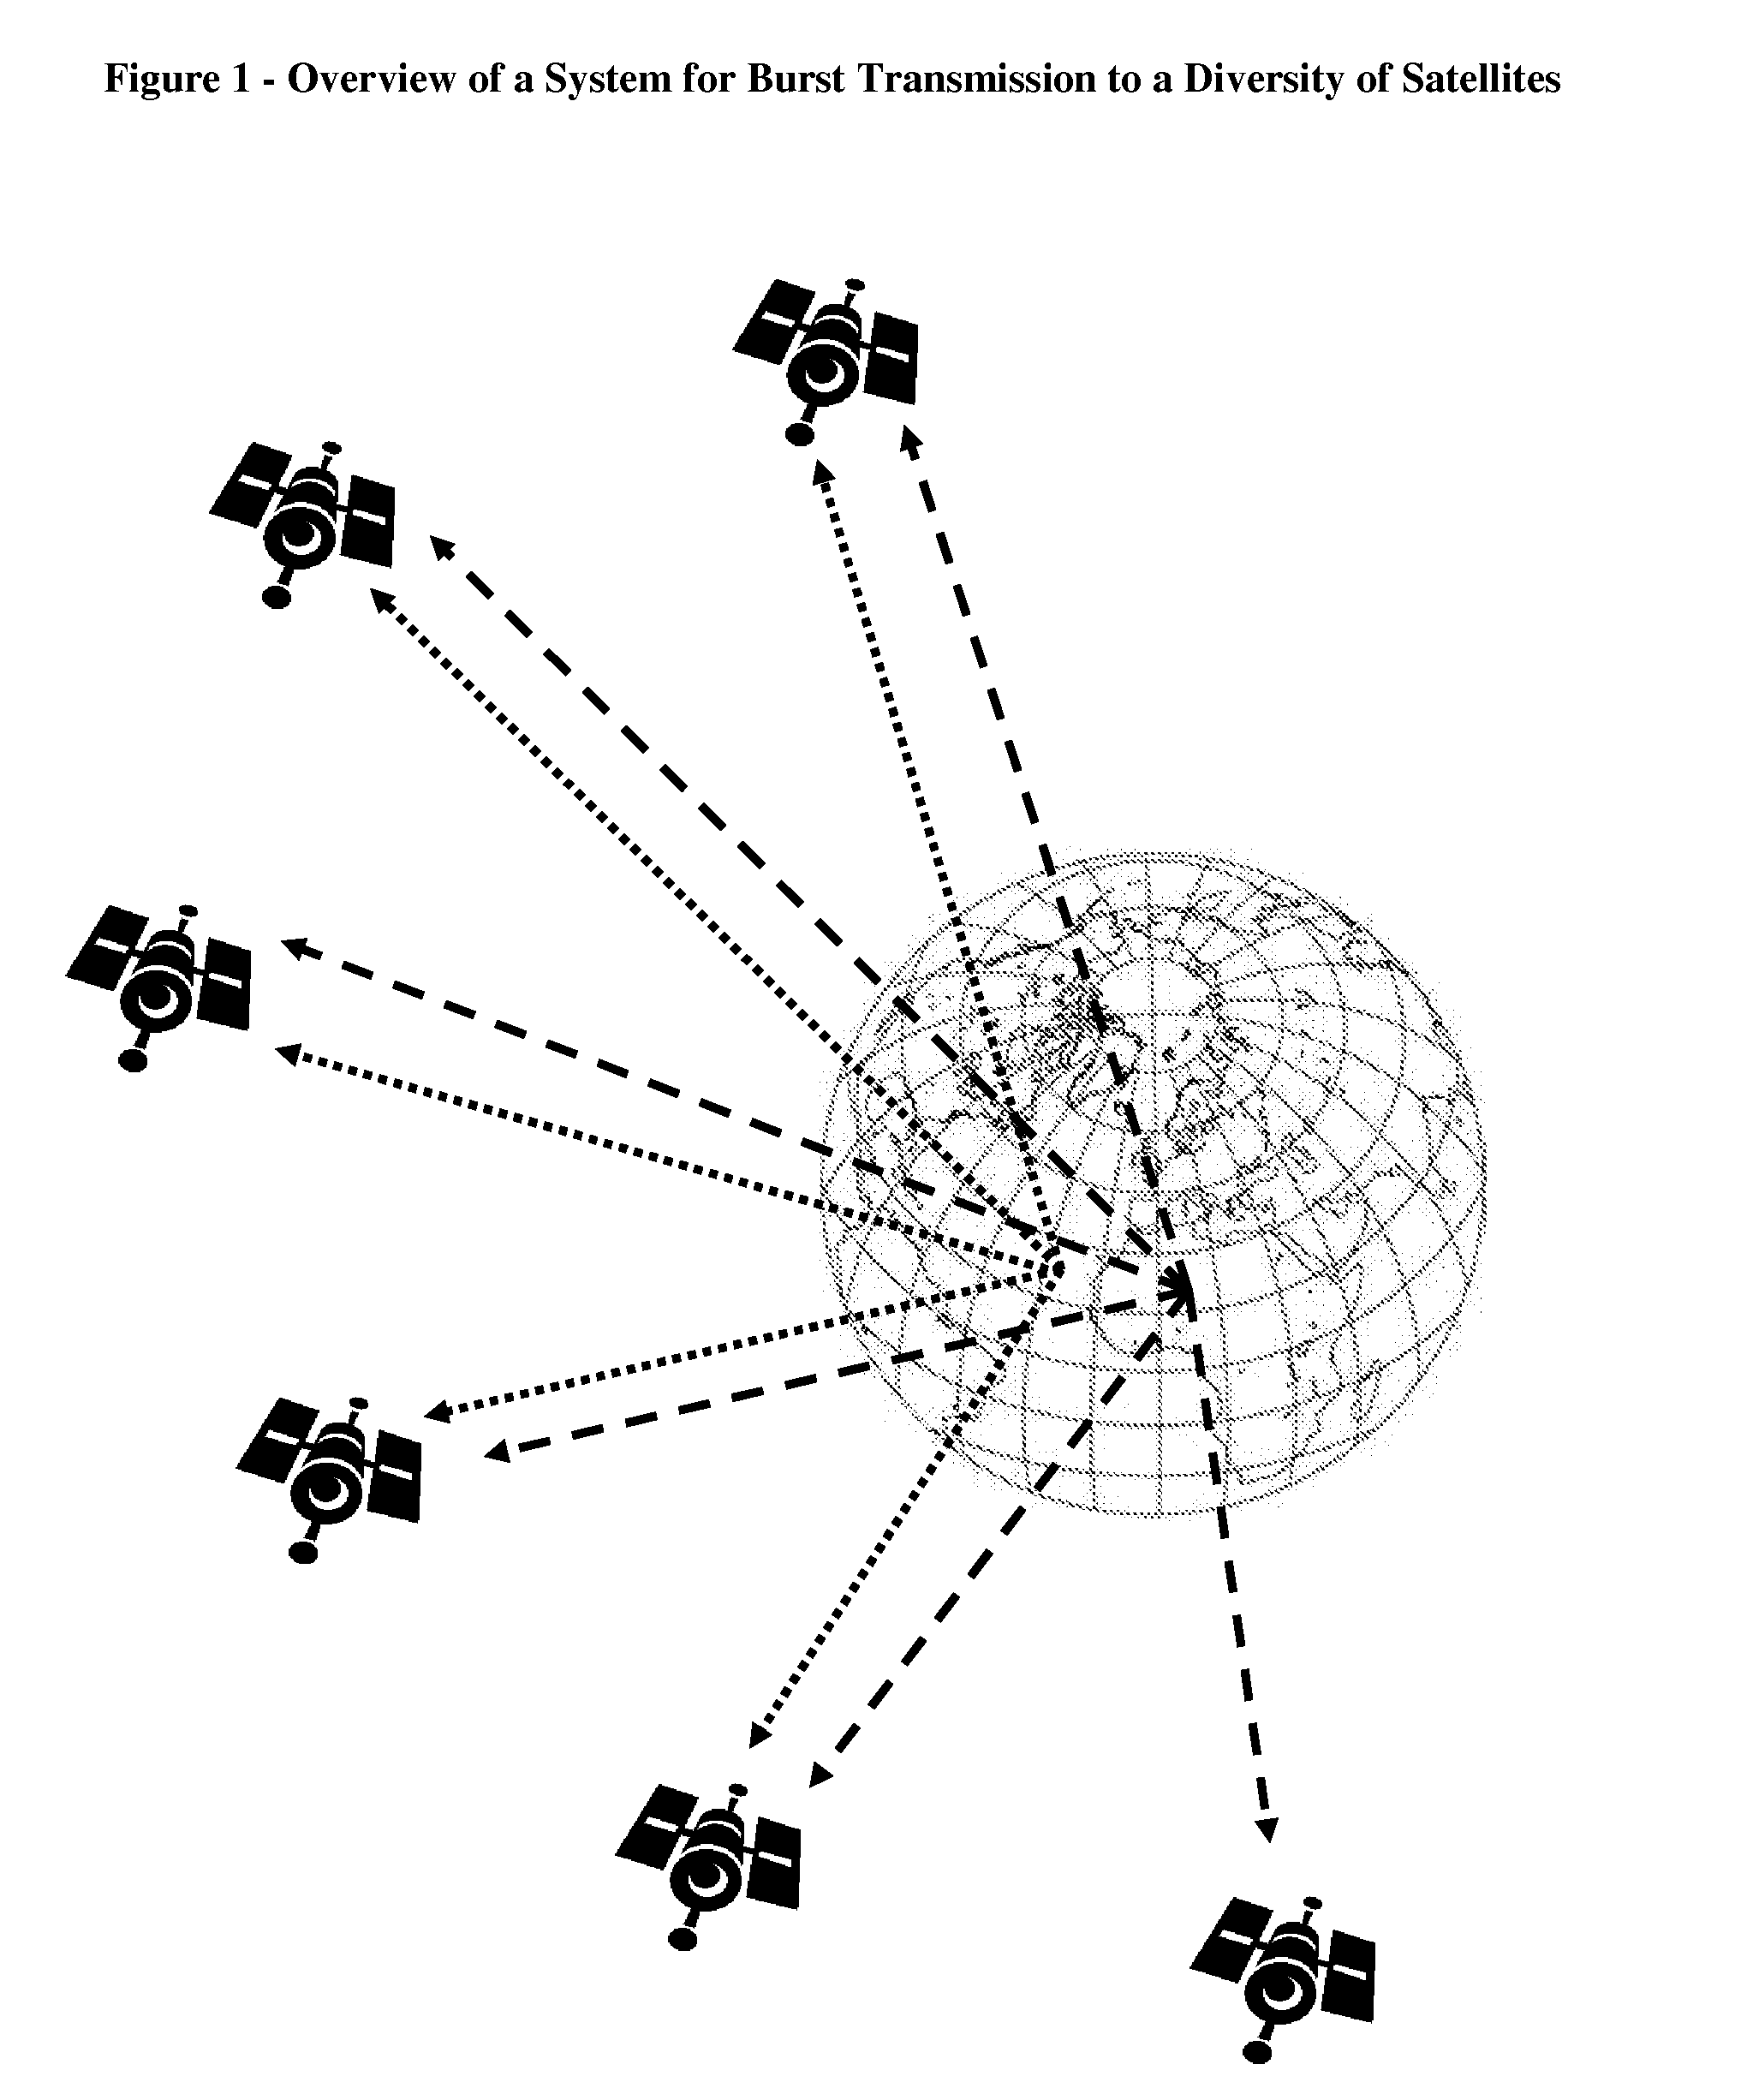 Channel Allocation for Burst Transmission to a Diversity of Satellites